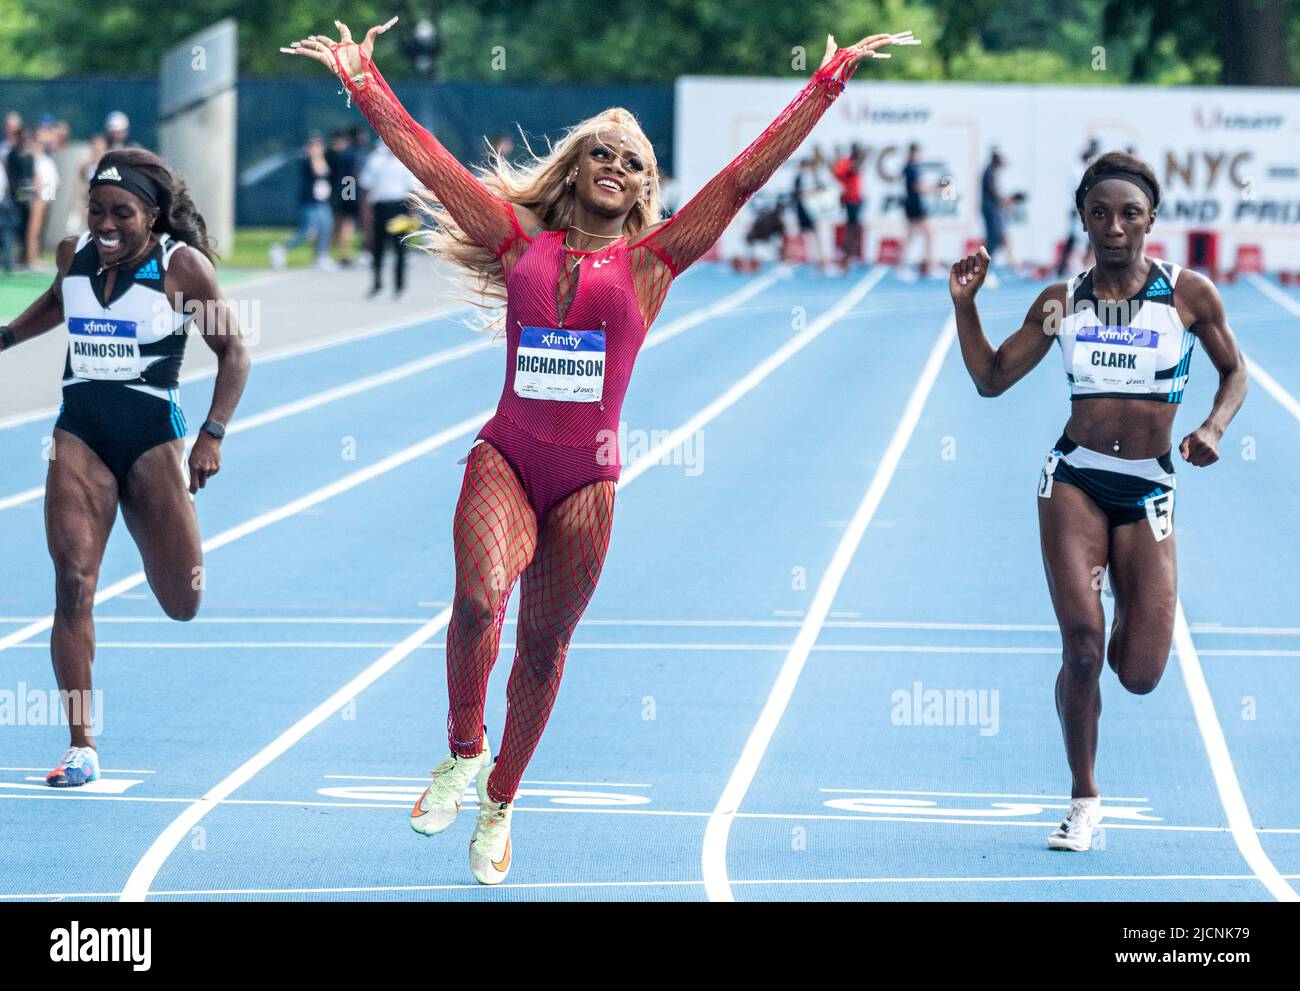 Usatf new york city grand prix hires stock photography and images Alamy